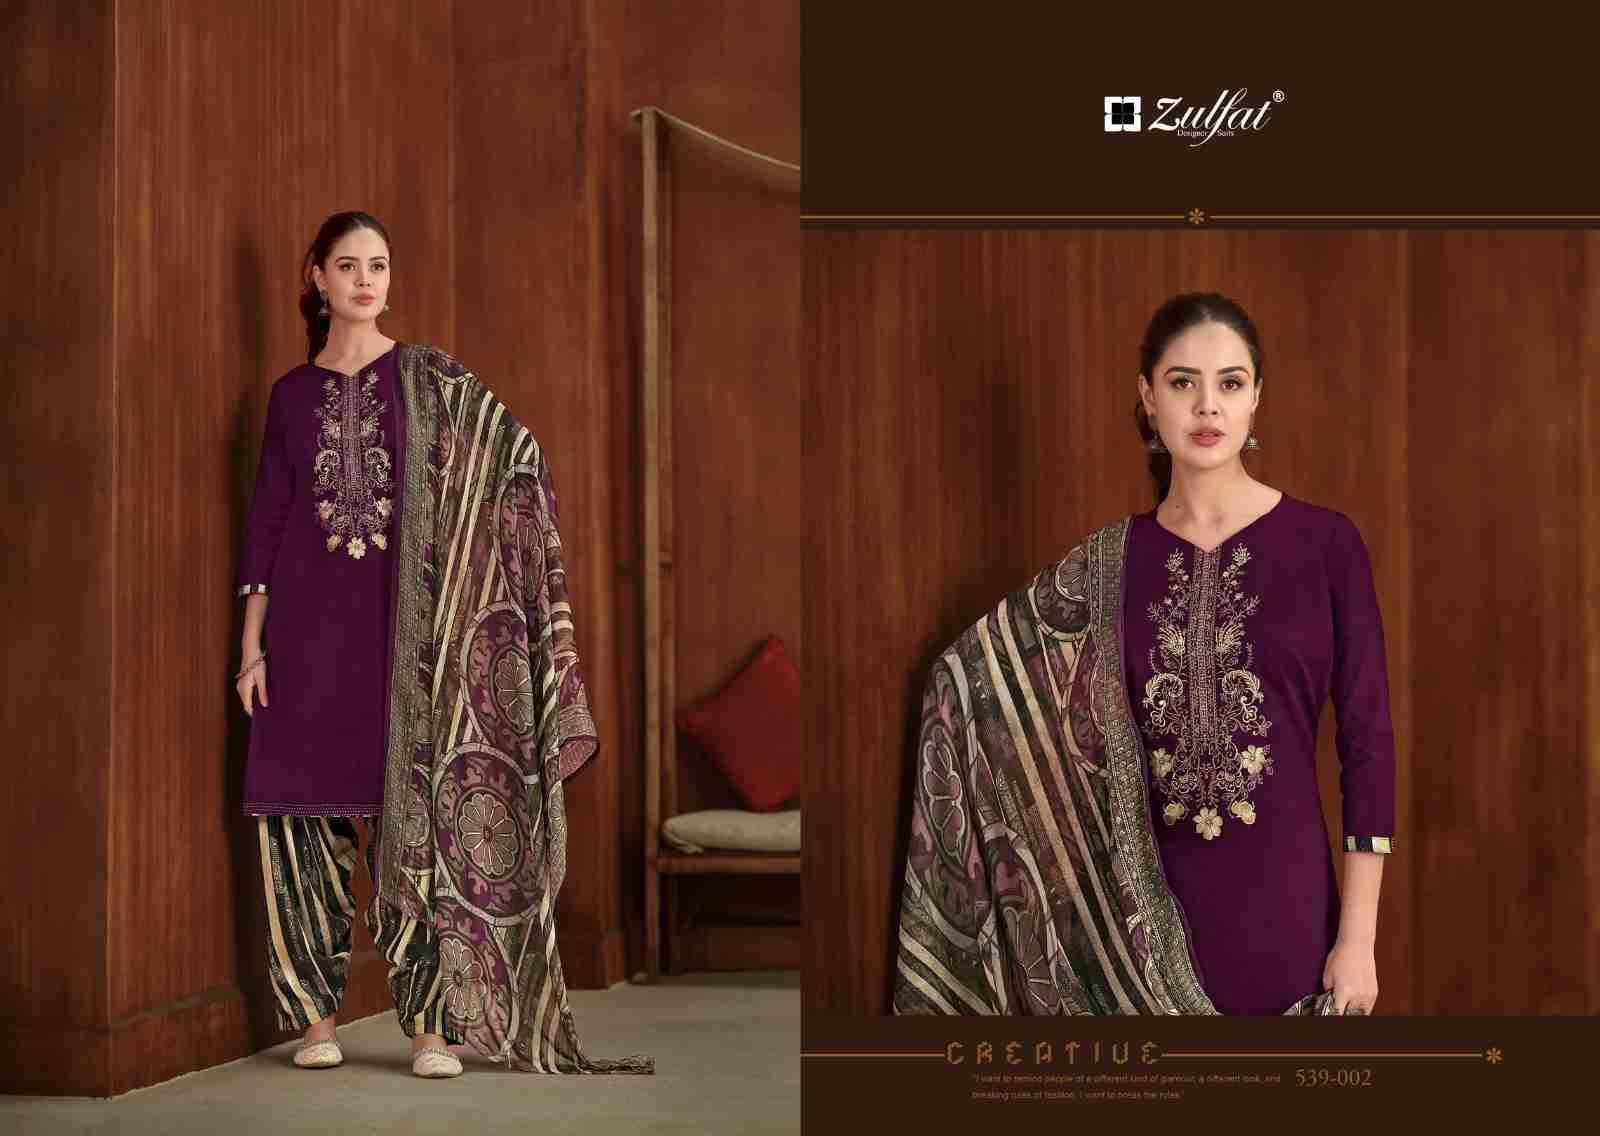 Shanaya By Zulfat 539-001 To 539-008 Series Beautiful Festive Suits Stylish Fancy Colorful Casual Wear & Ethnic Wear Pure Cotton Embroidered Dresses At Wholesale Price